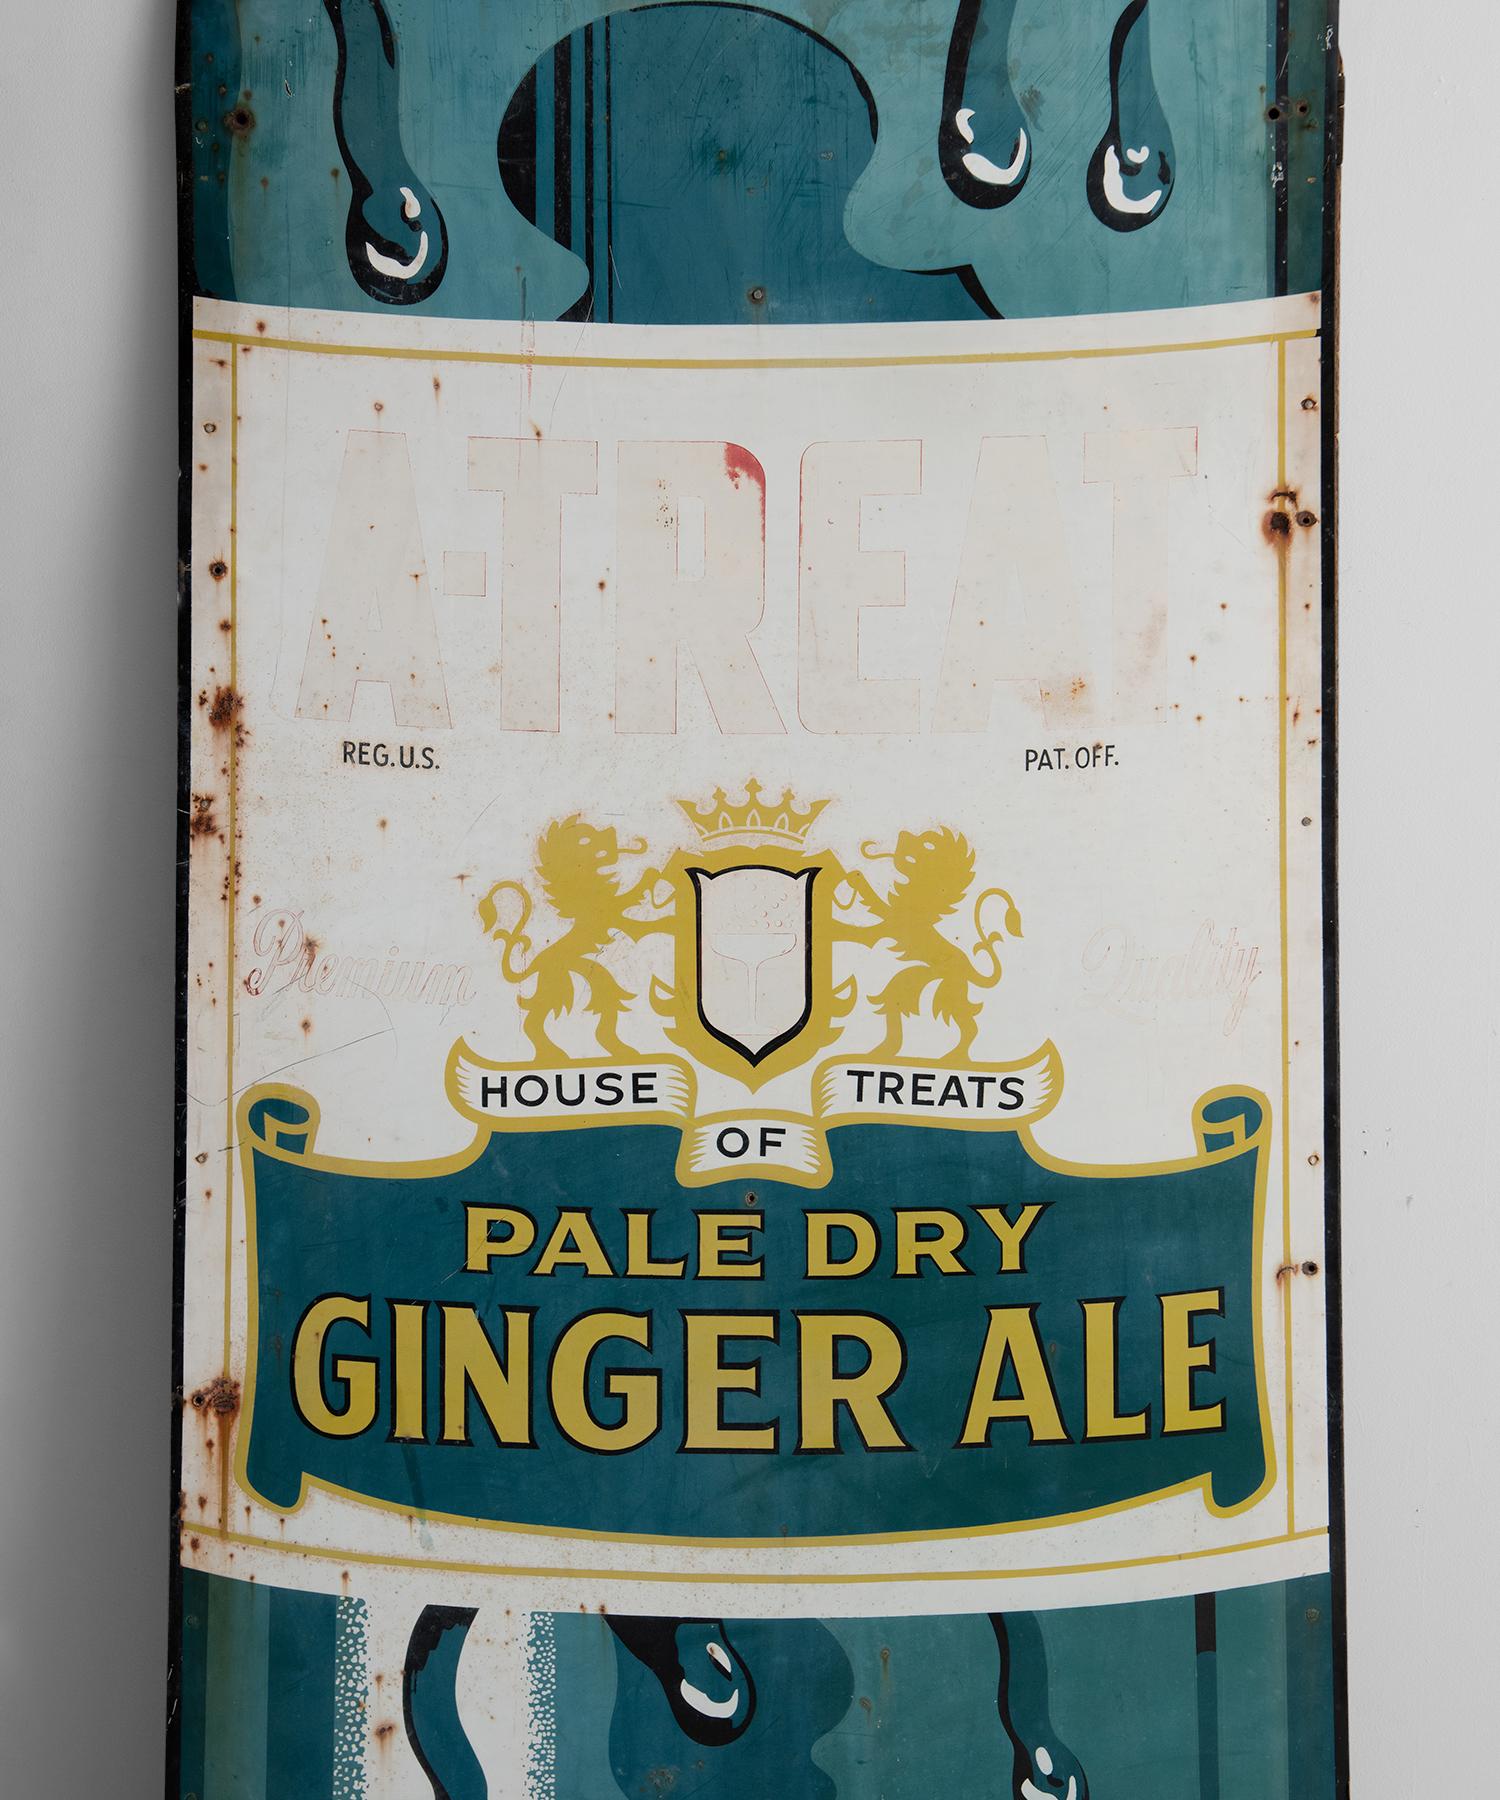 10' tall A-Treat ginger Ale advertisement, America, 20th century.

Enameled, painted aluminum sign.